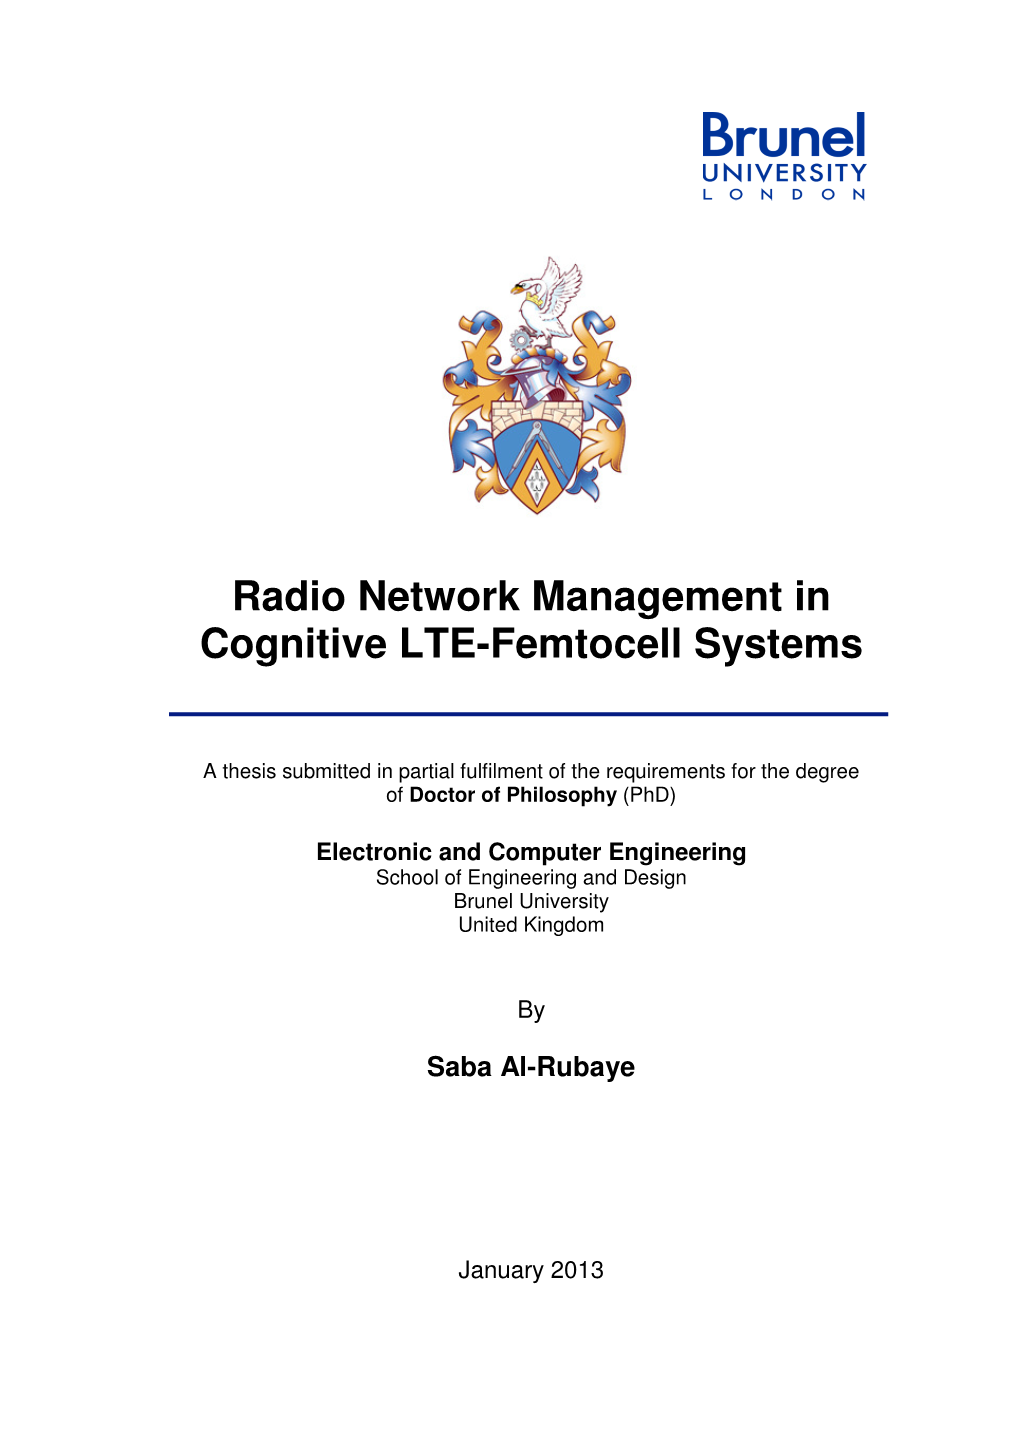 Radio Network Management in Cognitive LTE-Femtocell Systems